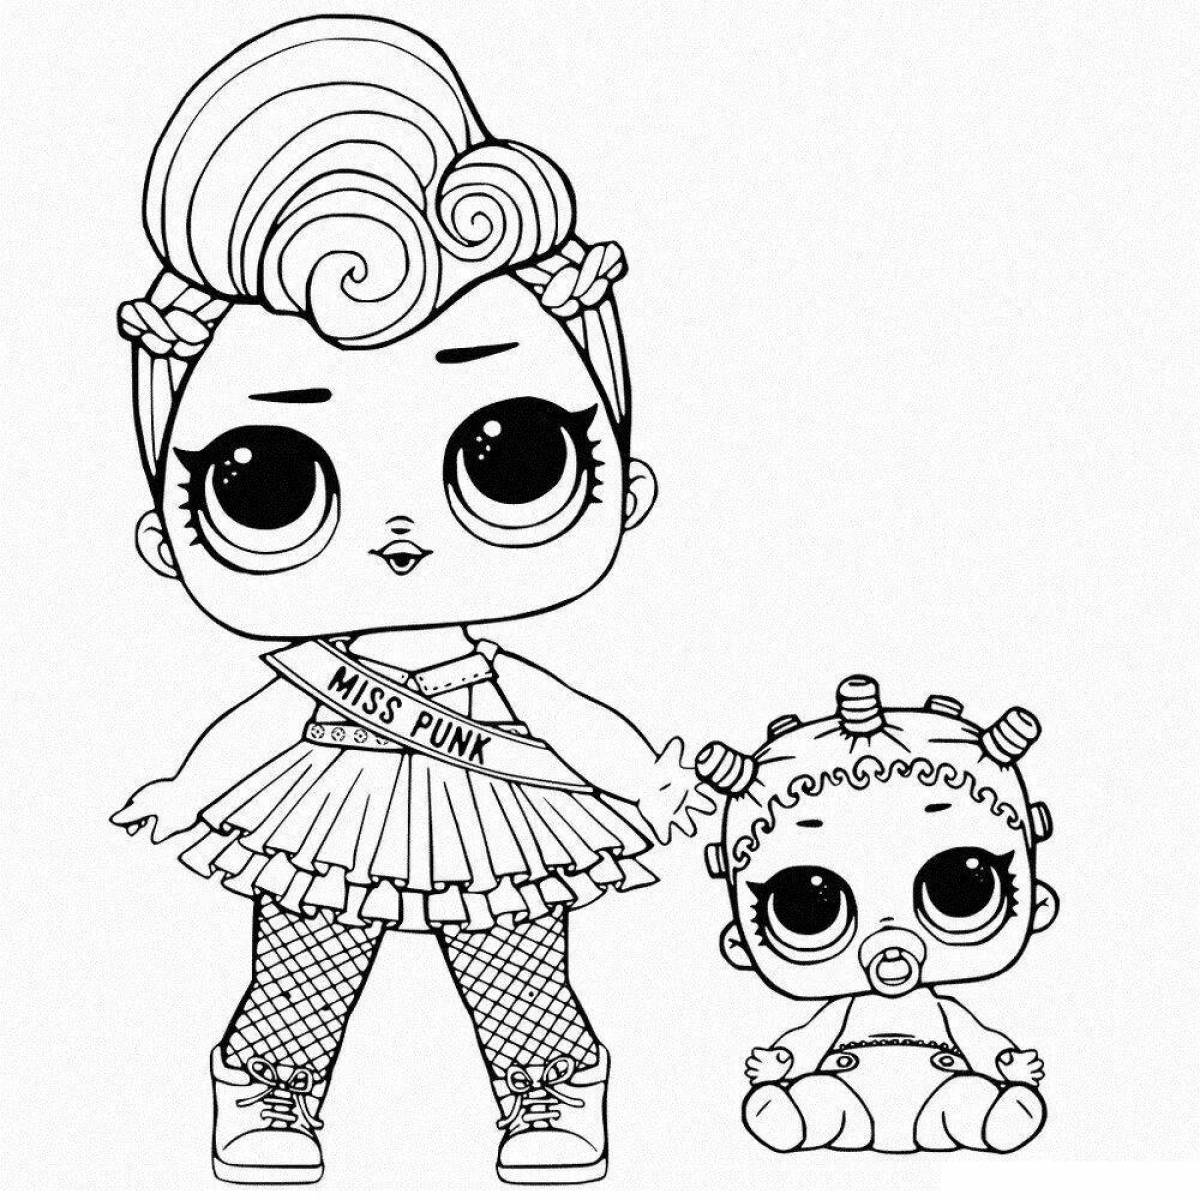 Lowe's lovely doll coloring book for kids